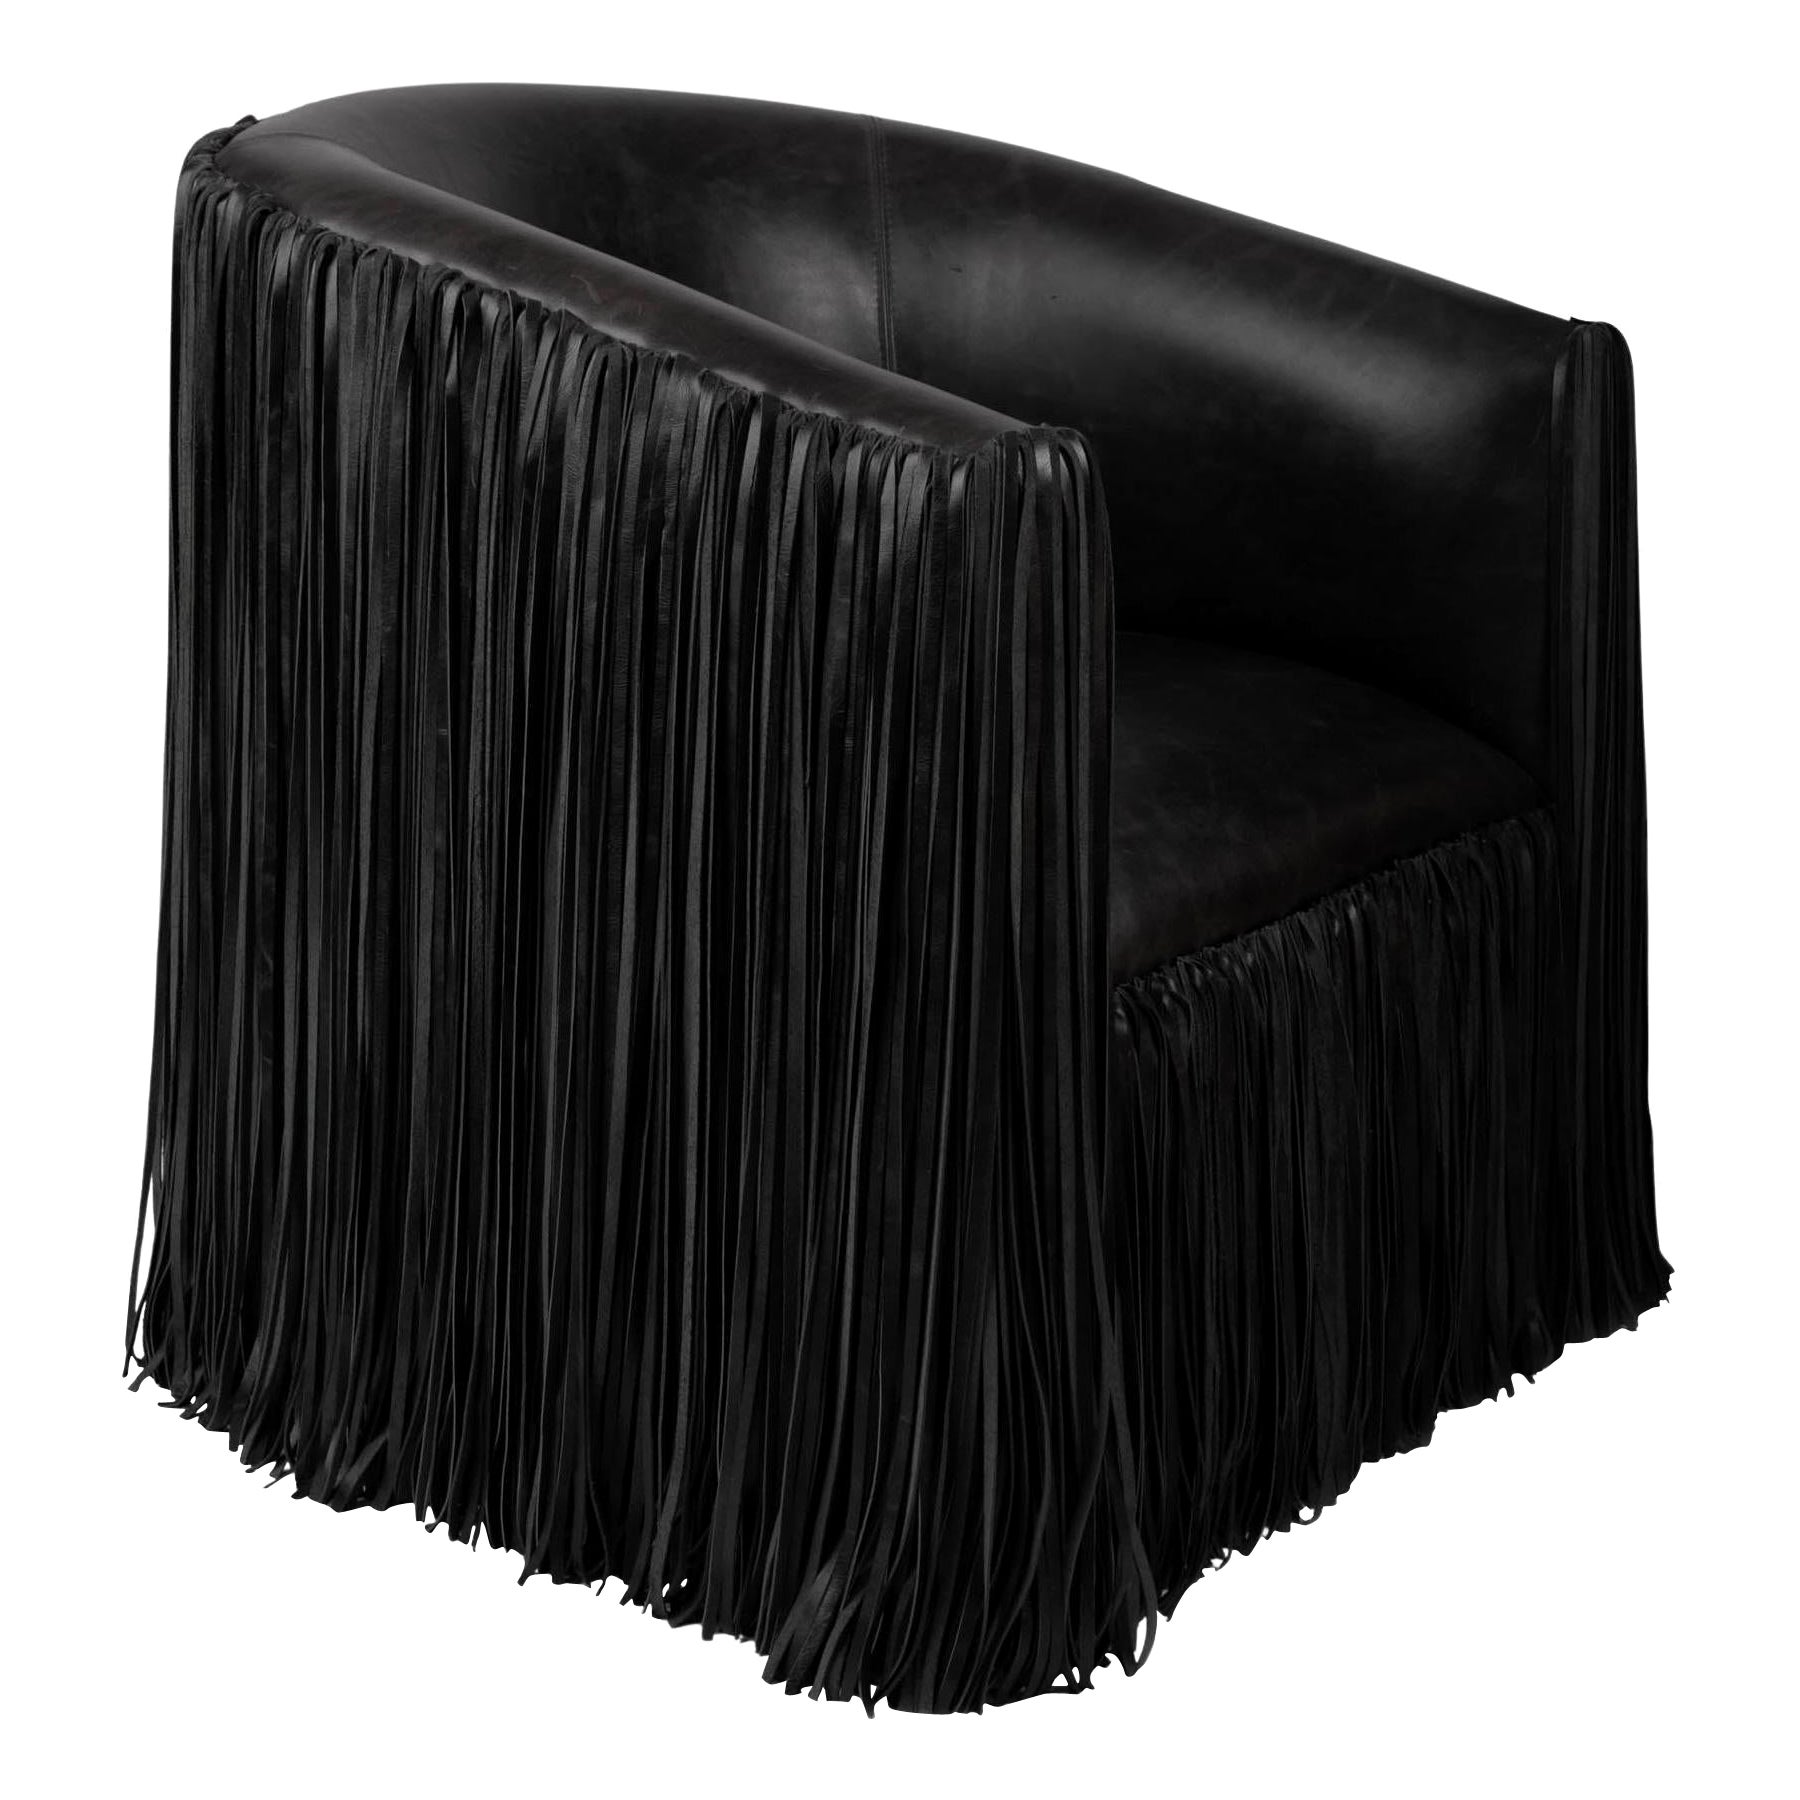 Chair, Shaggy Leather Swivel in Black